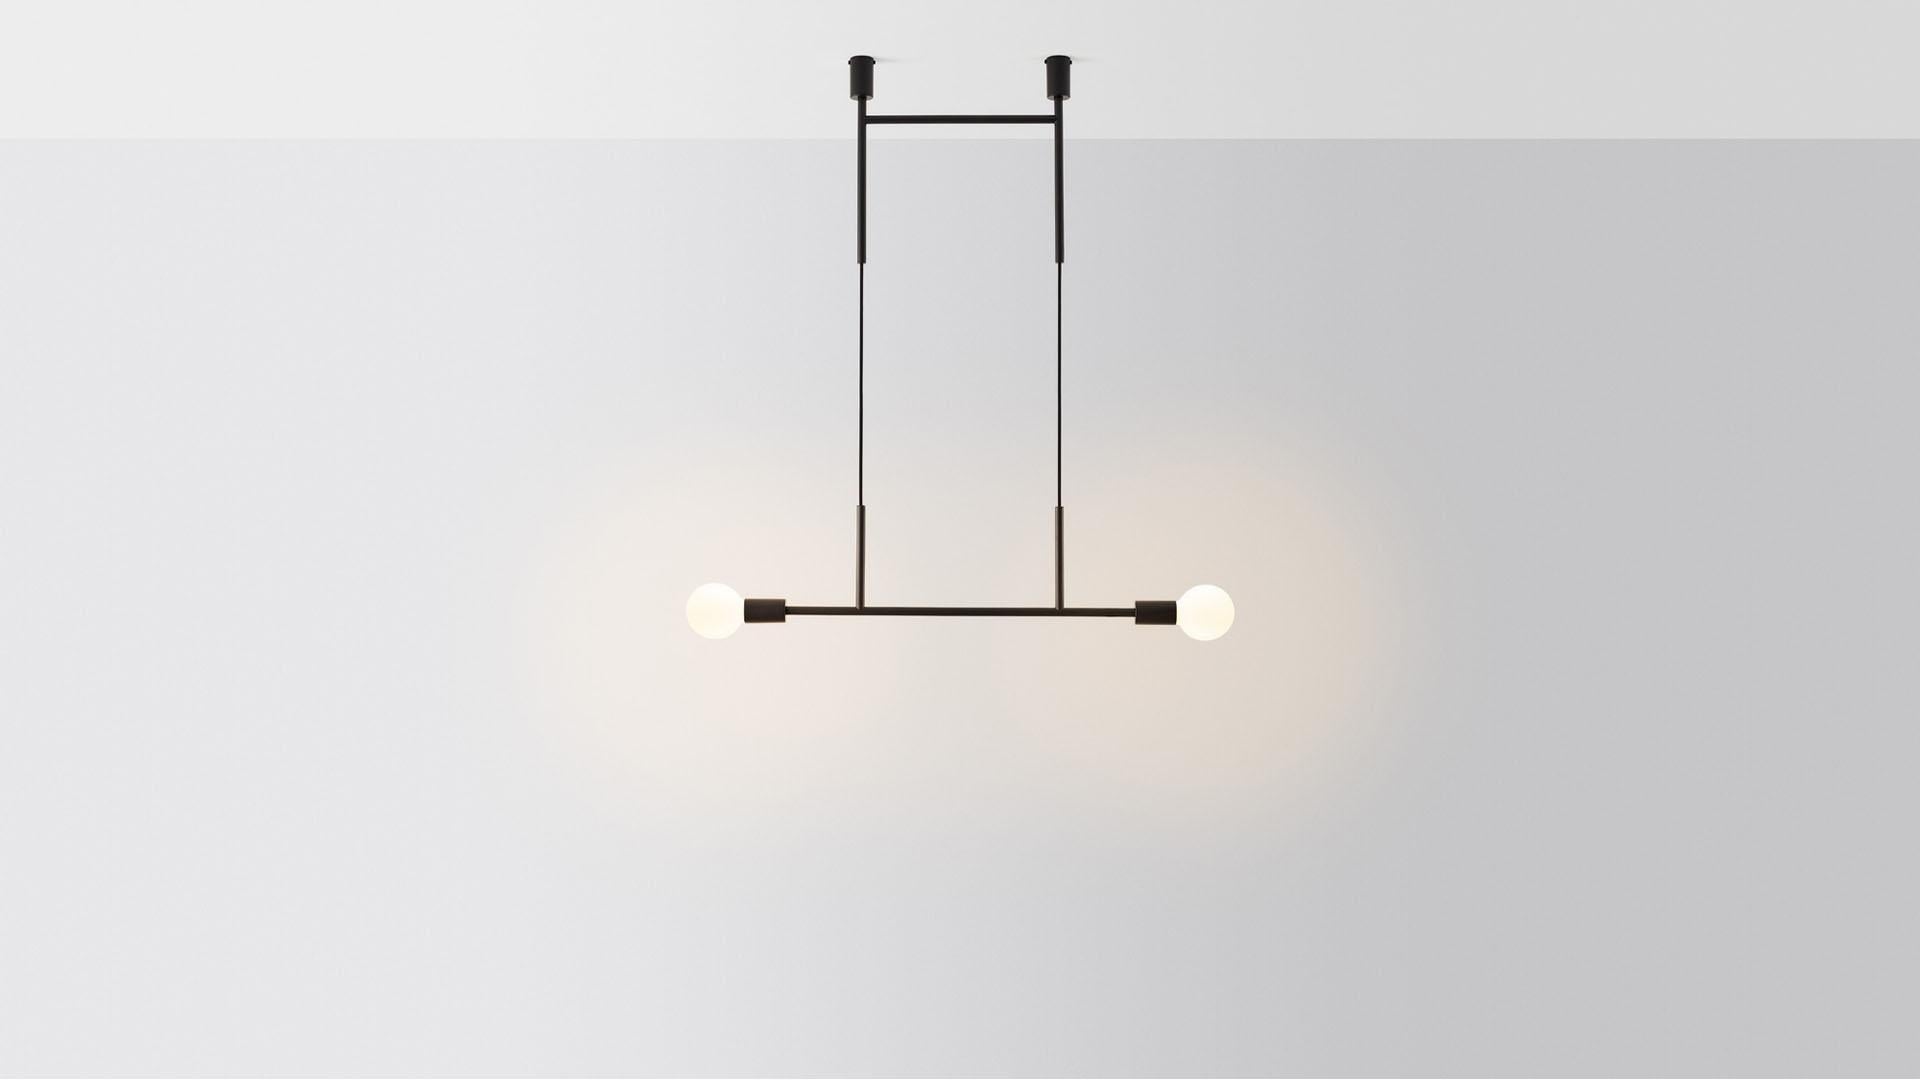 Wide step kick pendant light by Volker Haug
Dimensions: W 95.5 x H 71 cm 
Material: Brass. 
Finishes: Polished, aged, brushed, bronzed, blackened, or plated
Cord: Fabric or metal
Lamp: Opal G95 LED (E26/E27 110 - 240V, 12V version